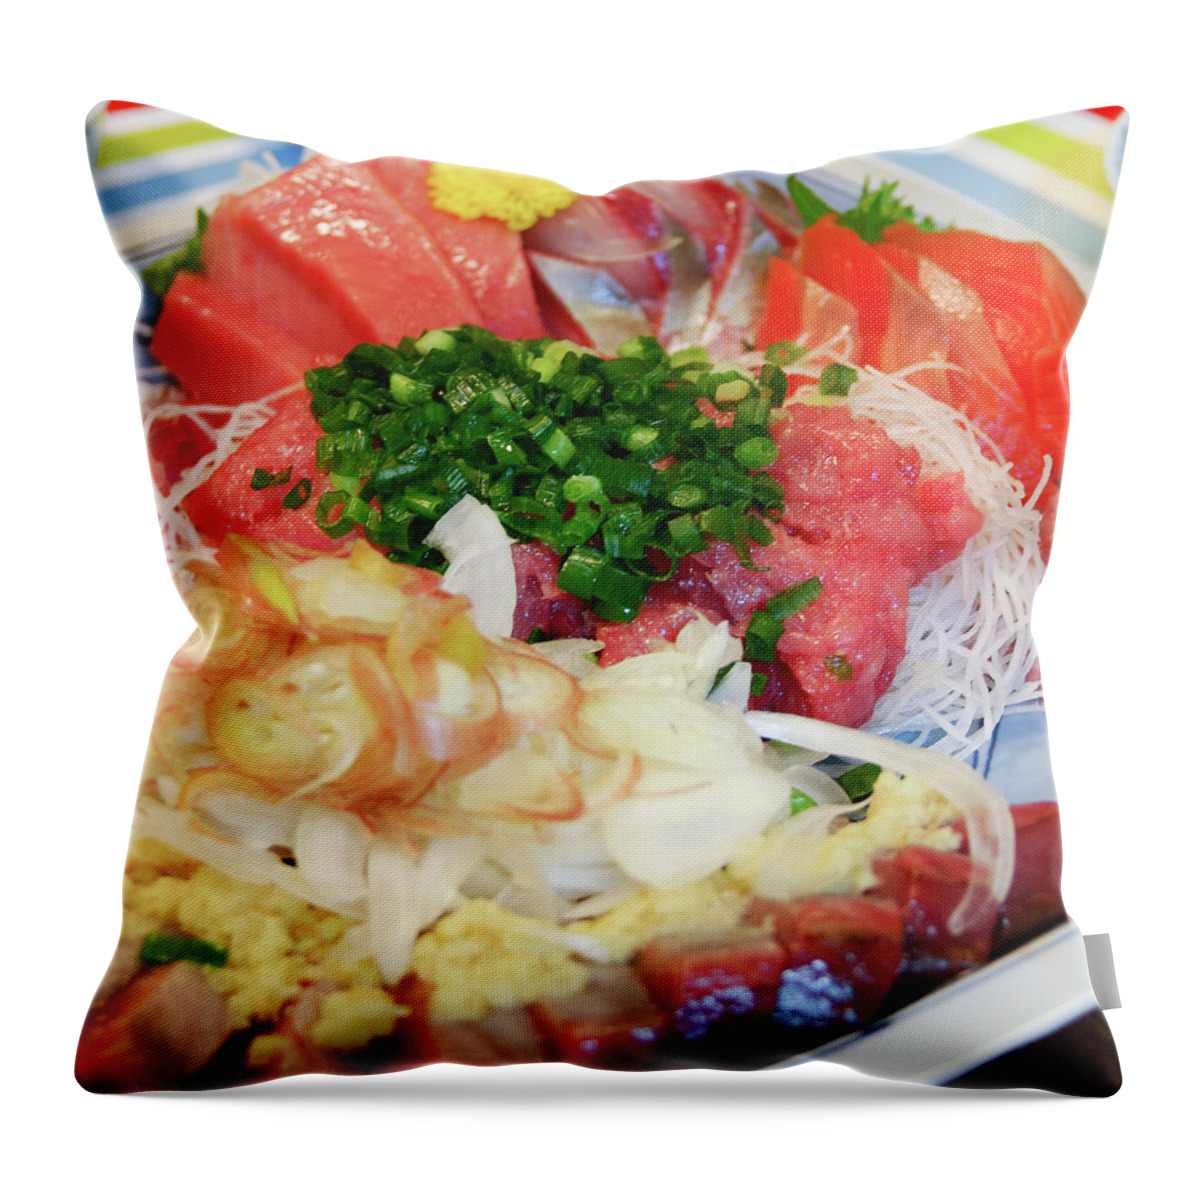 Japanese Food Throw Pillow featuring the photograph Fresh Sashimi Raw Fish Plate At Home by Ippei Naoi